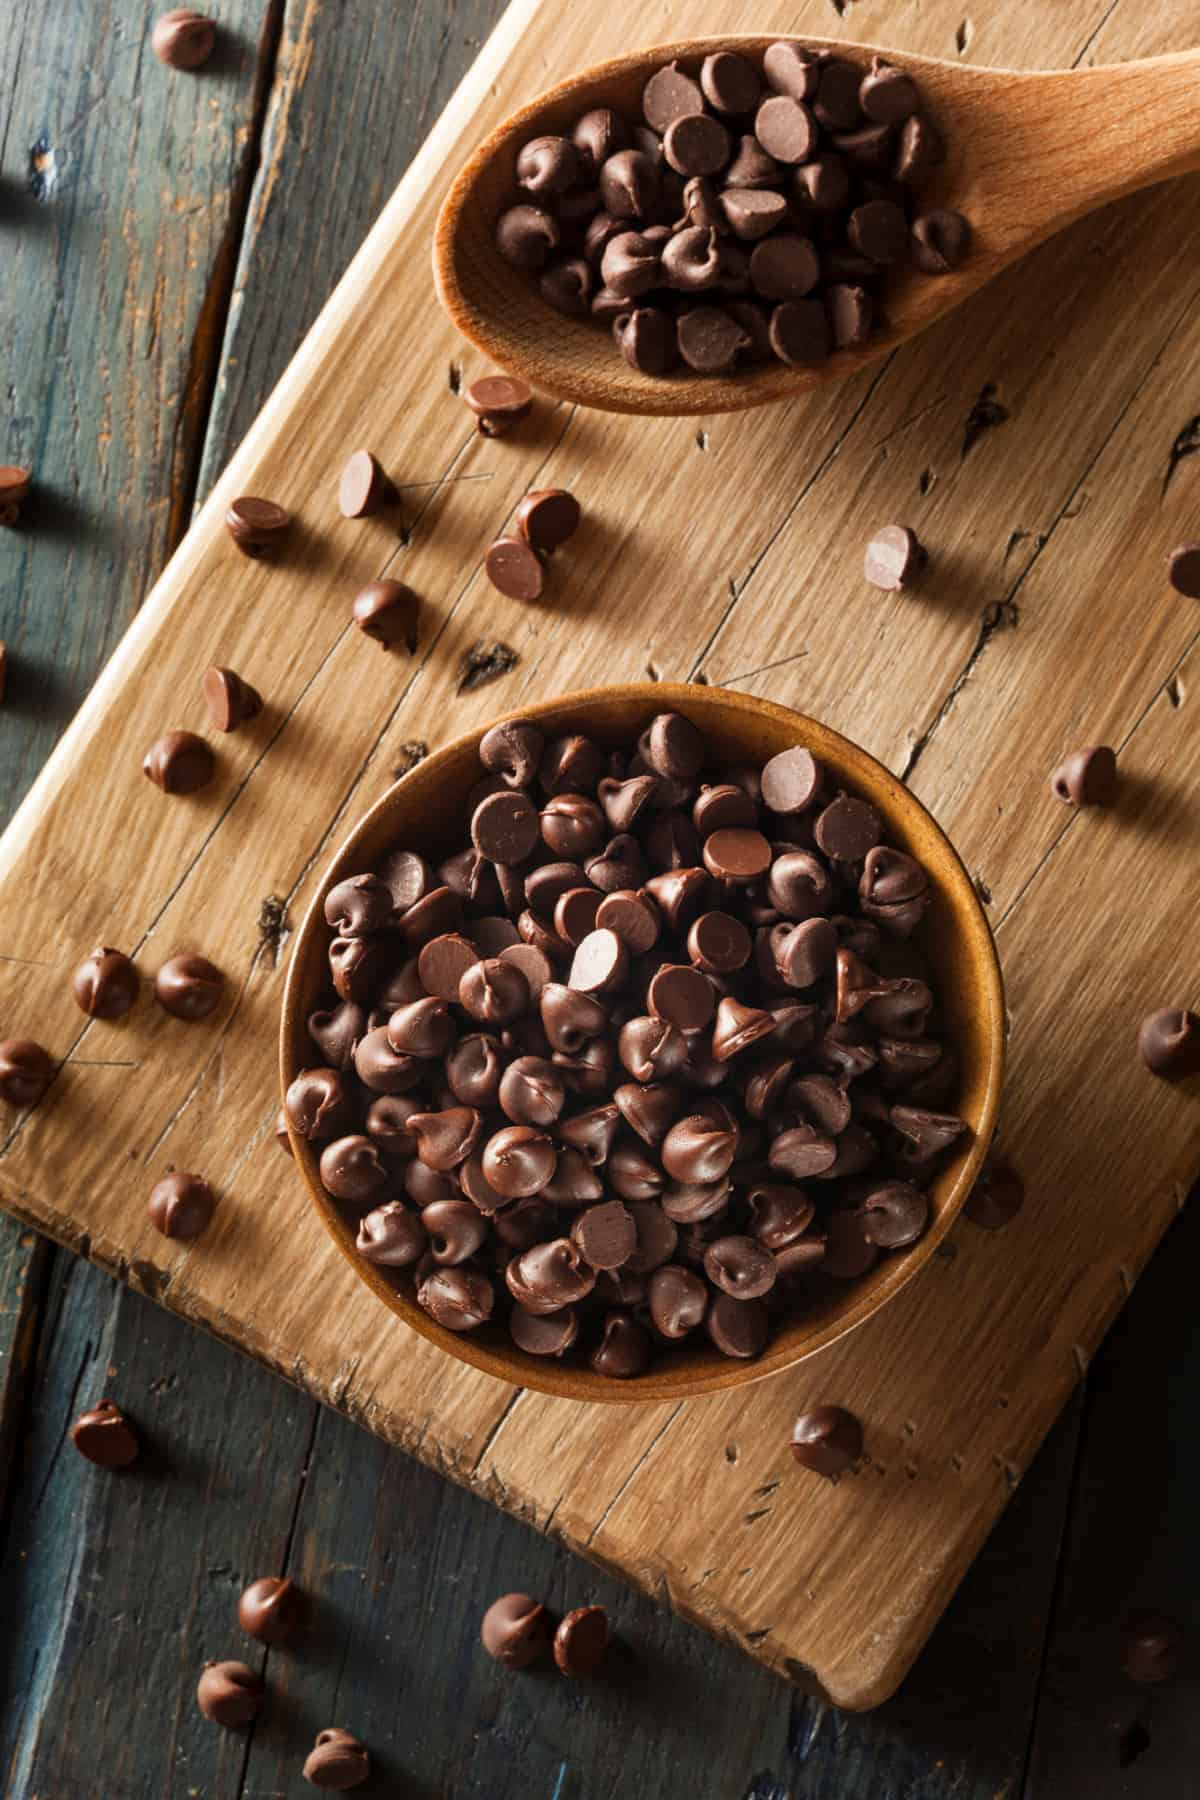 Bowl of chocolate chips on a wooden board.